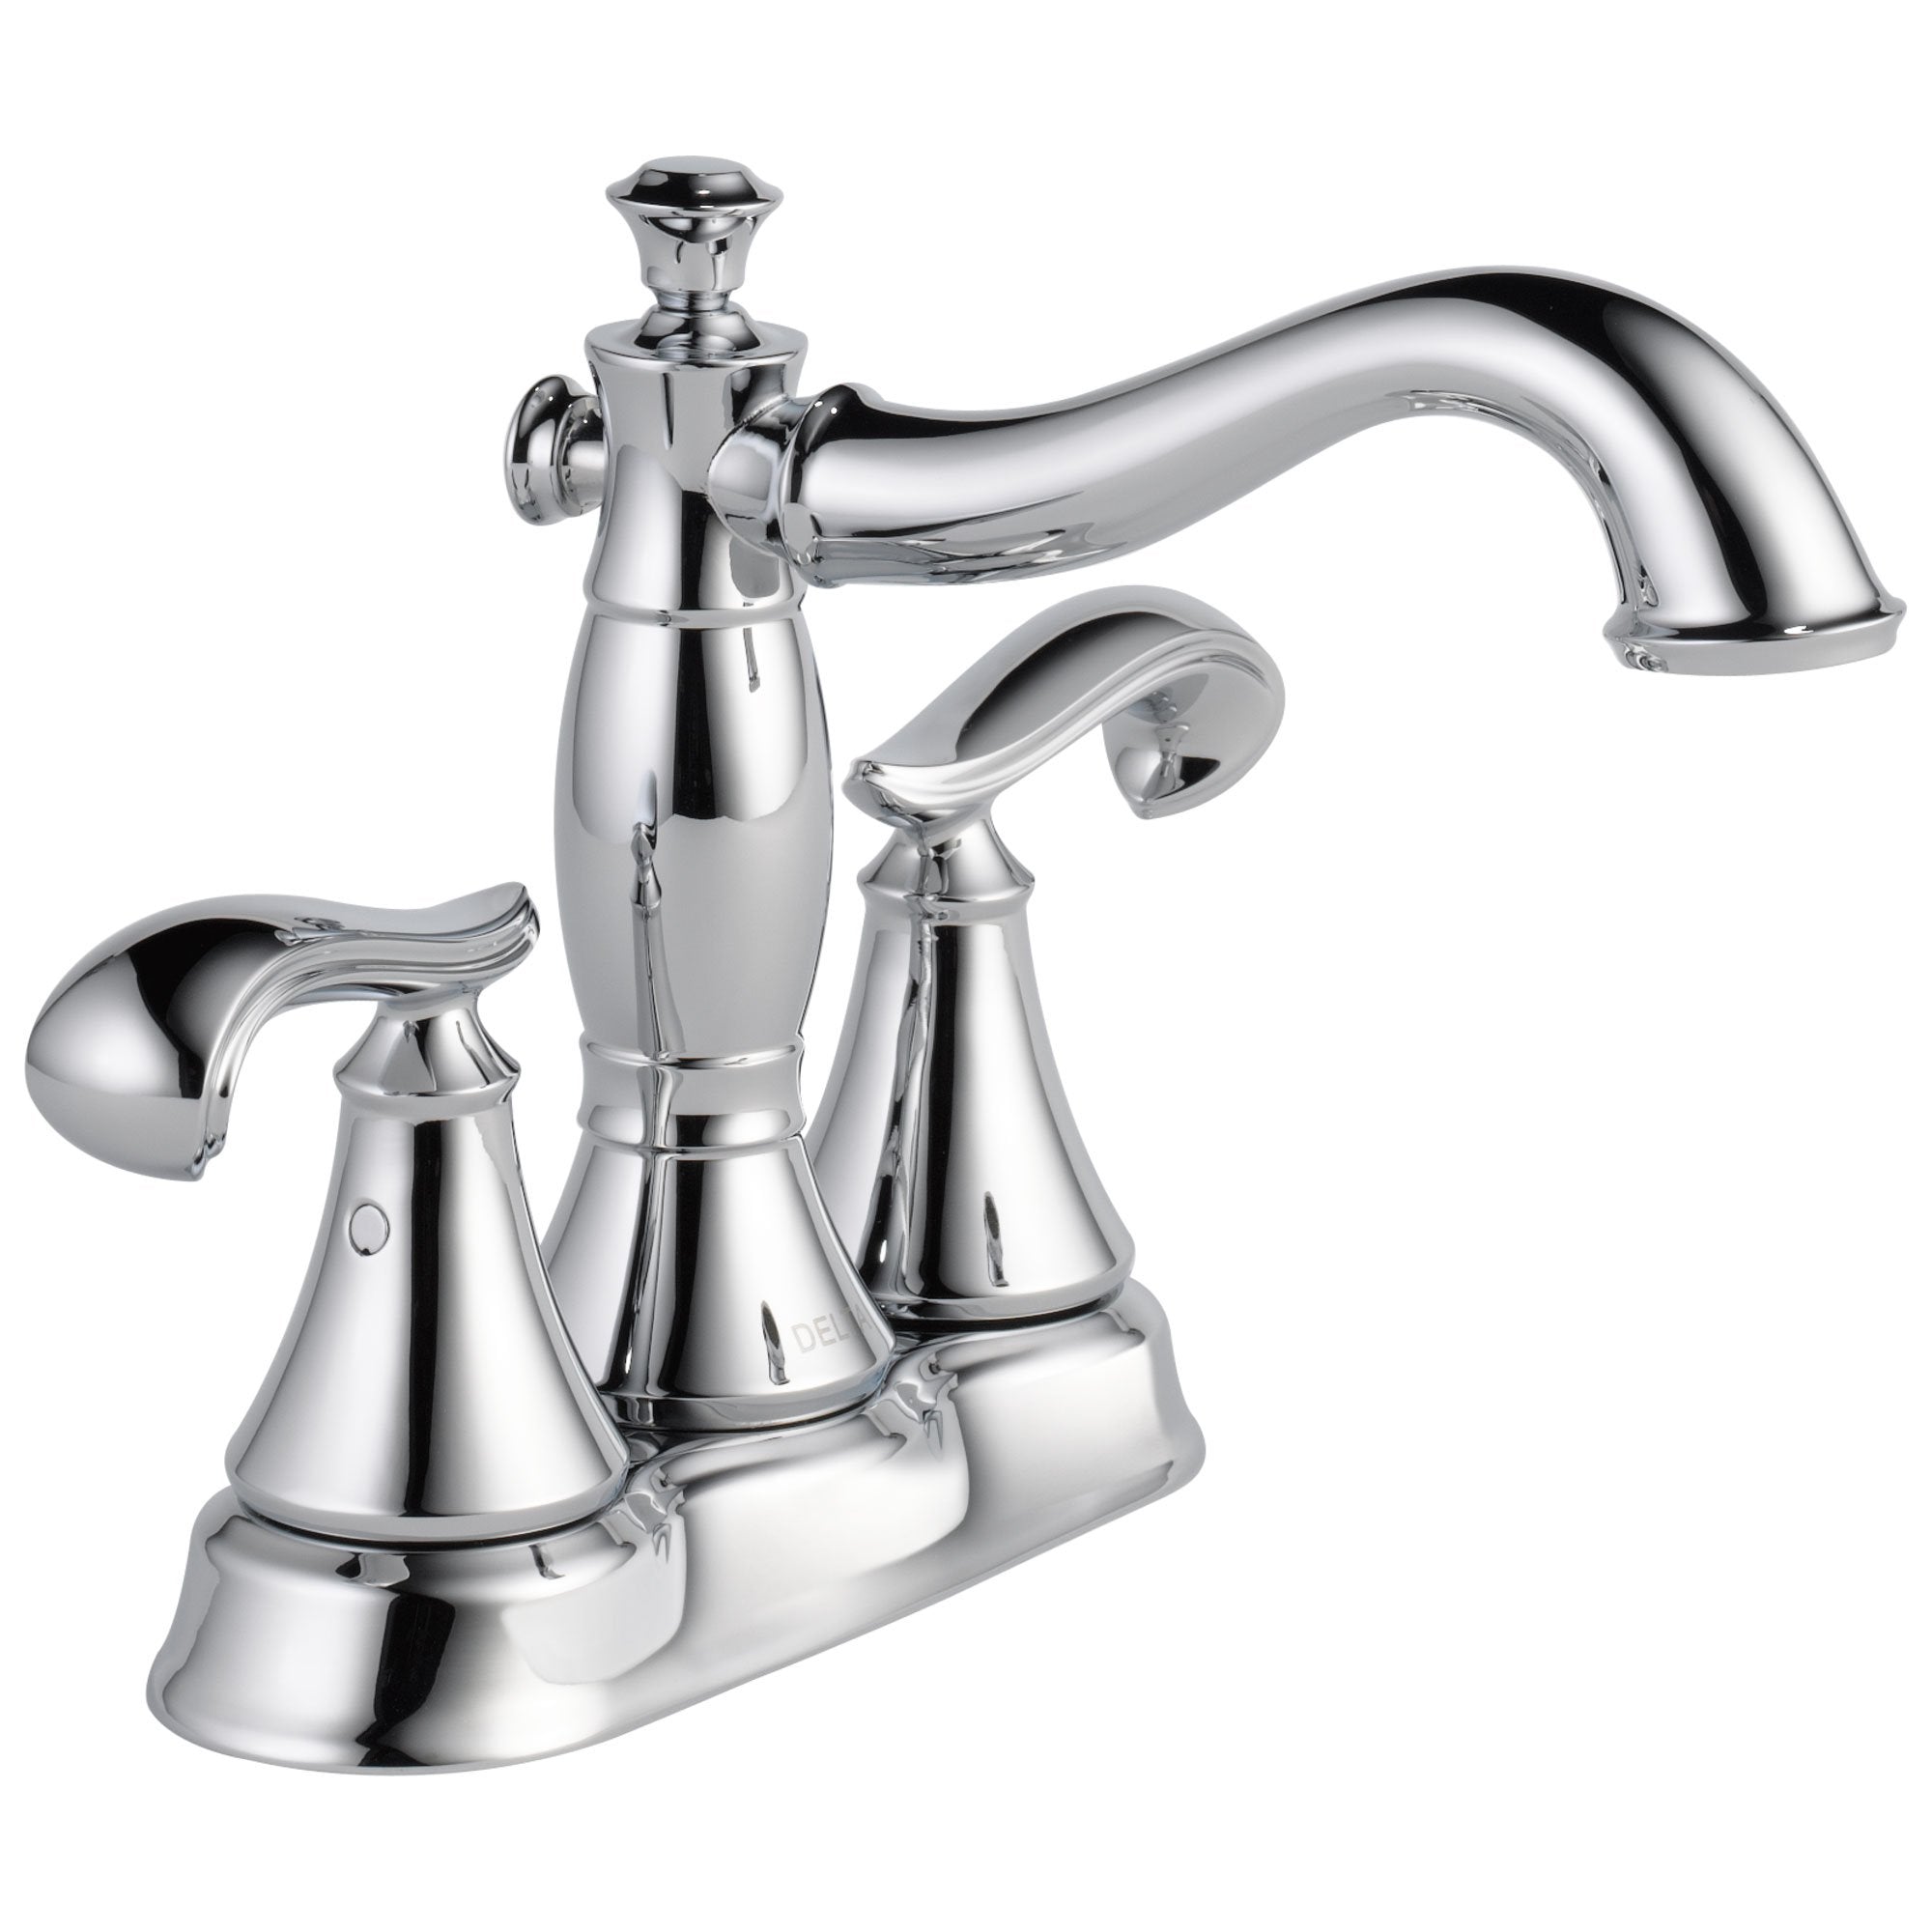 Delta Cassidy Collection Chrome Finish 4" Centerset Lavatory Bathroom Faucet INCLUDES Two French Curve Lever Handles and Metal Pop-Up Drain D1809V